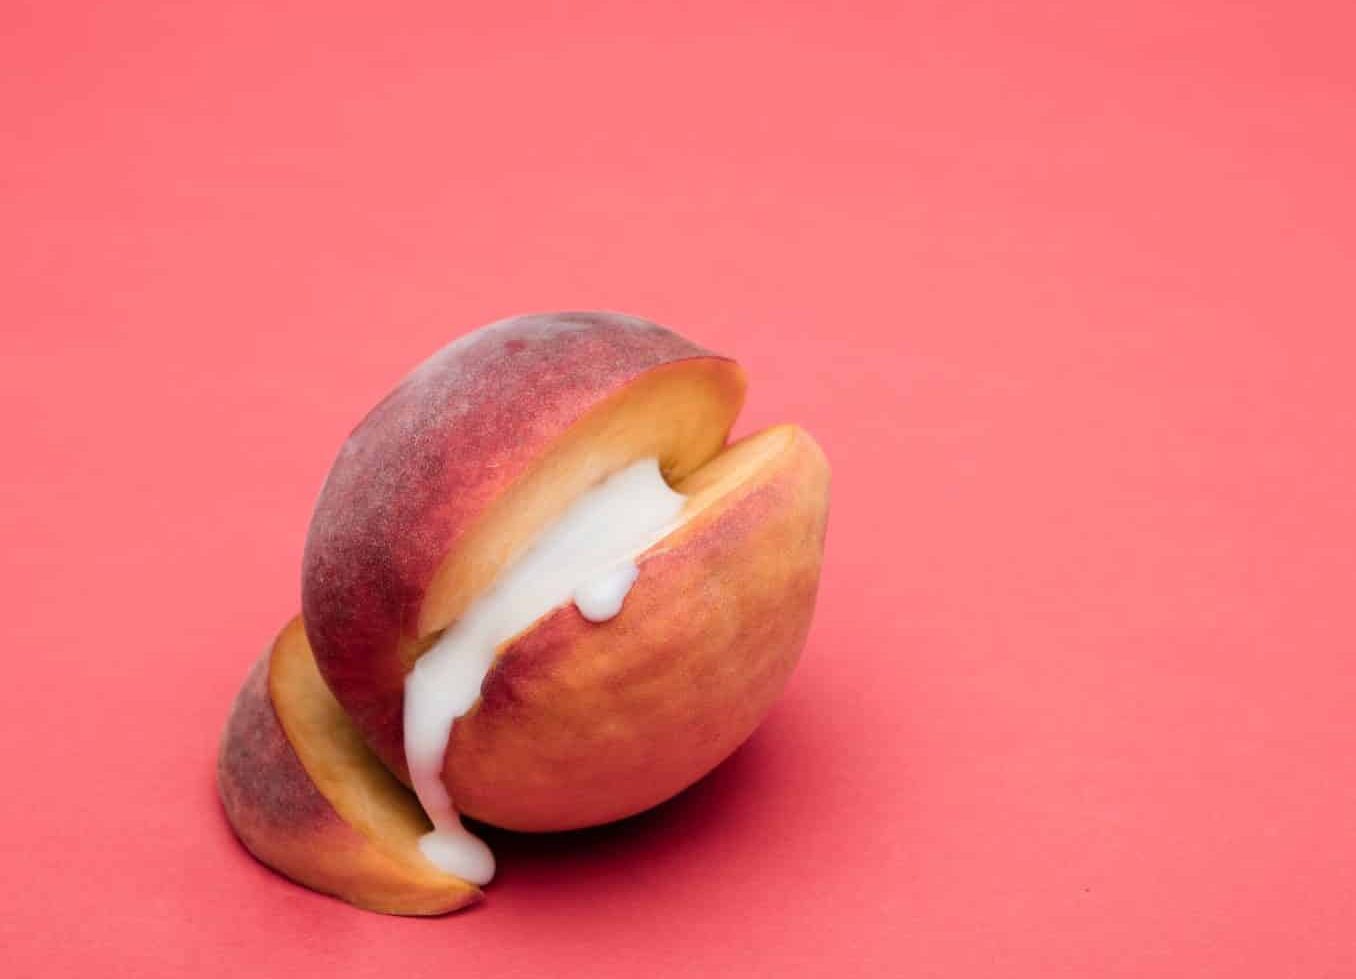 sex truth provocative image of a peach